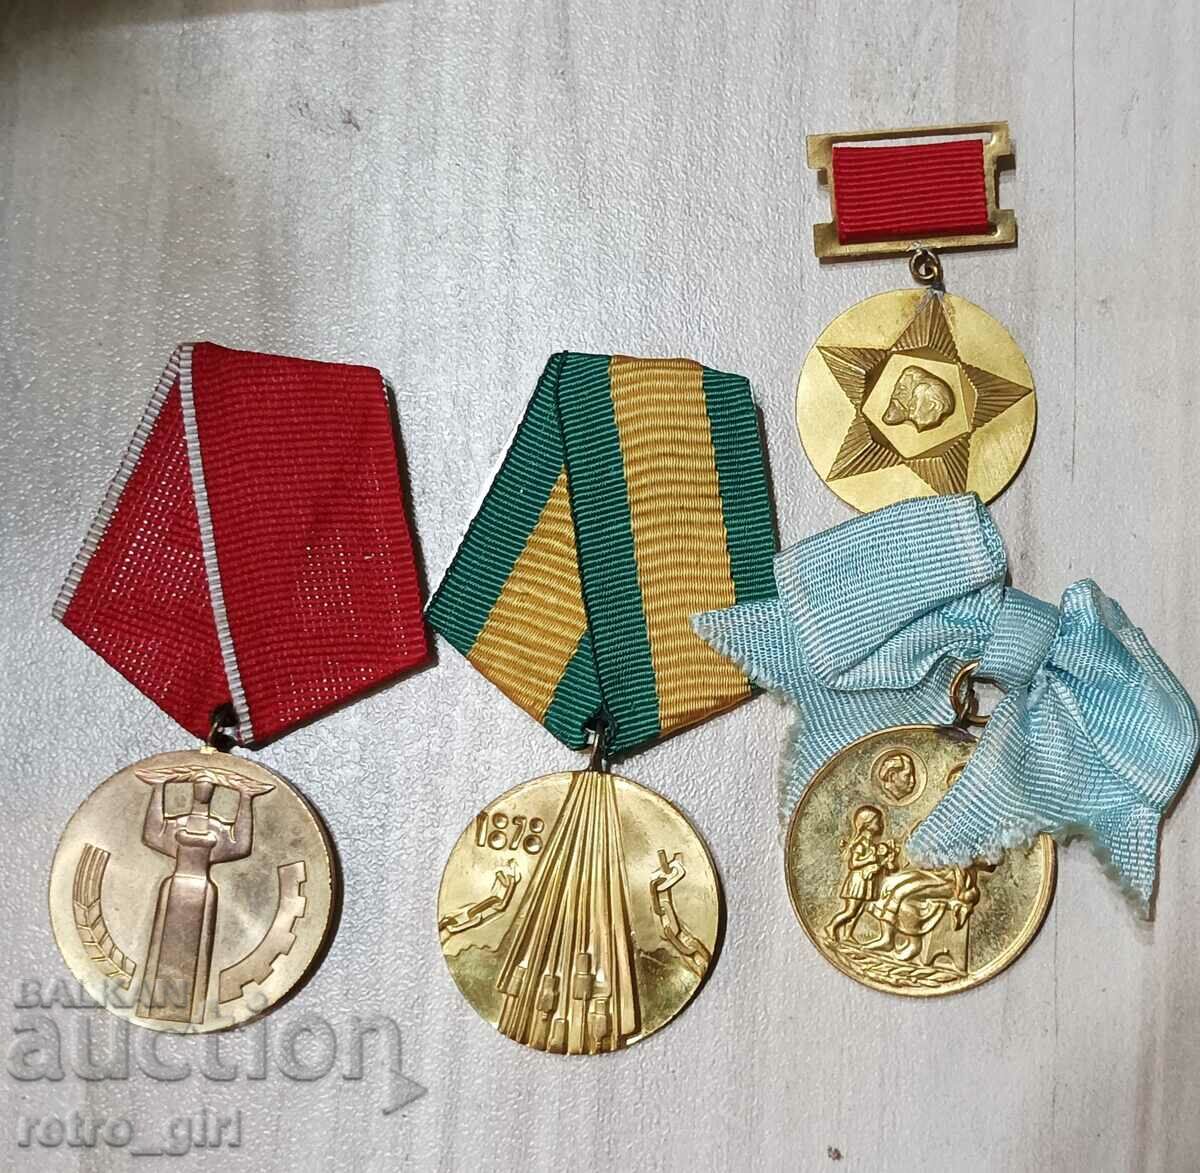 I sell a lot of medals.